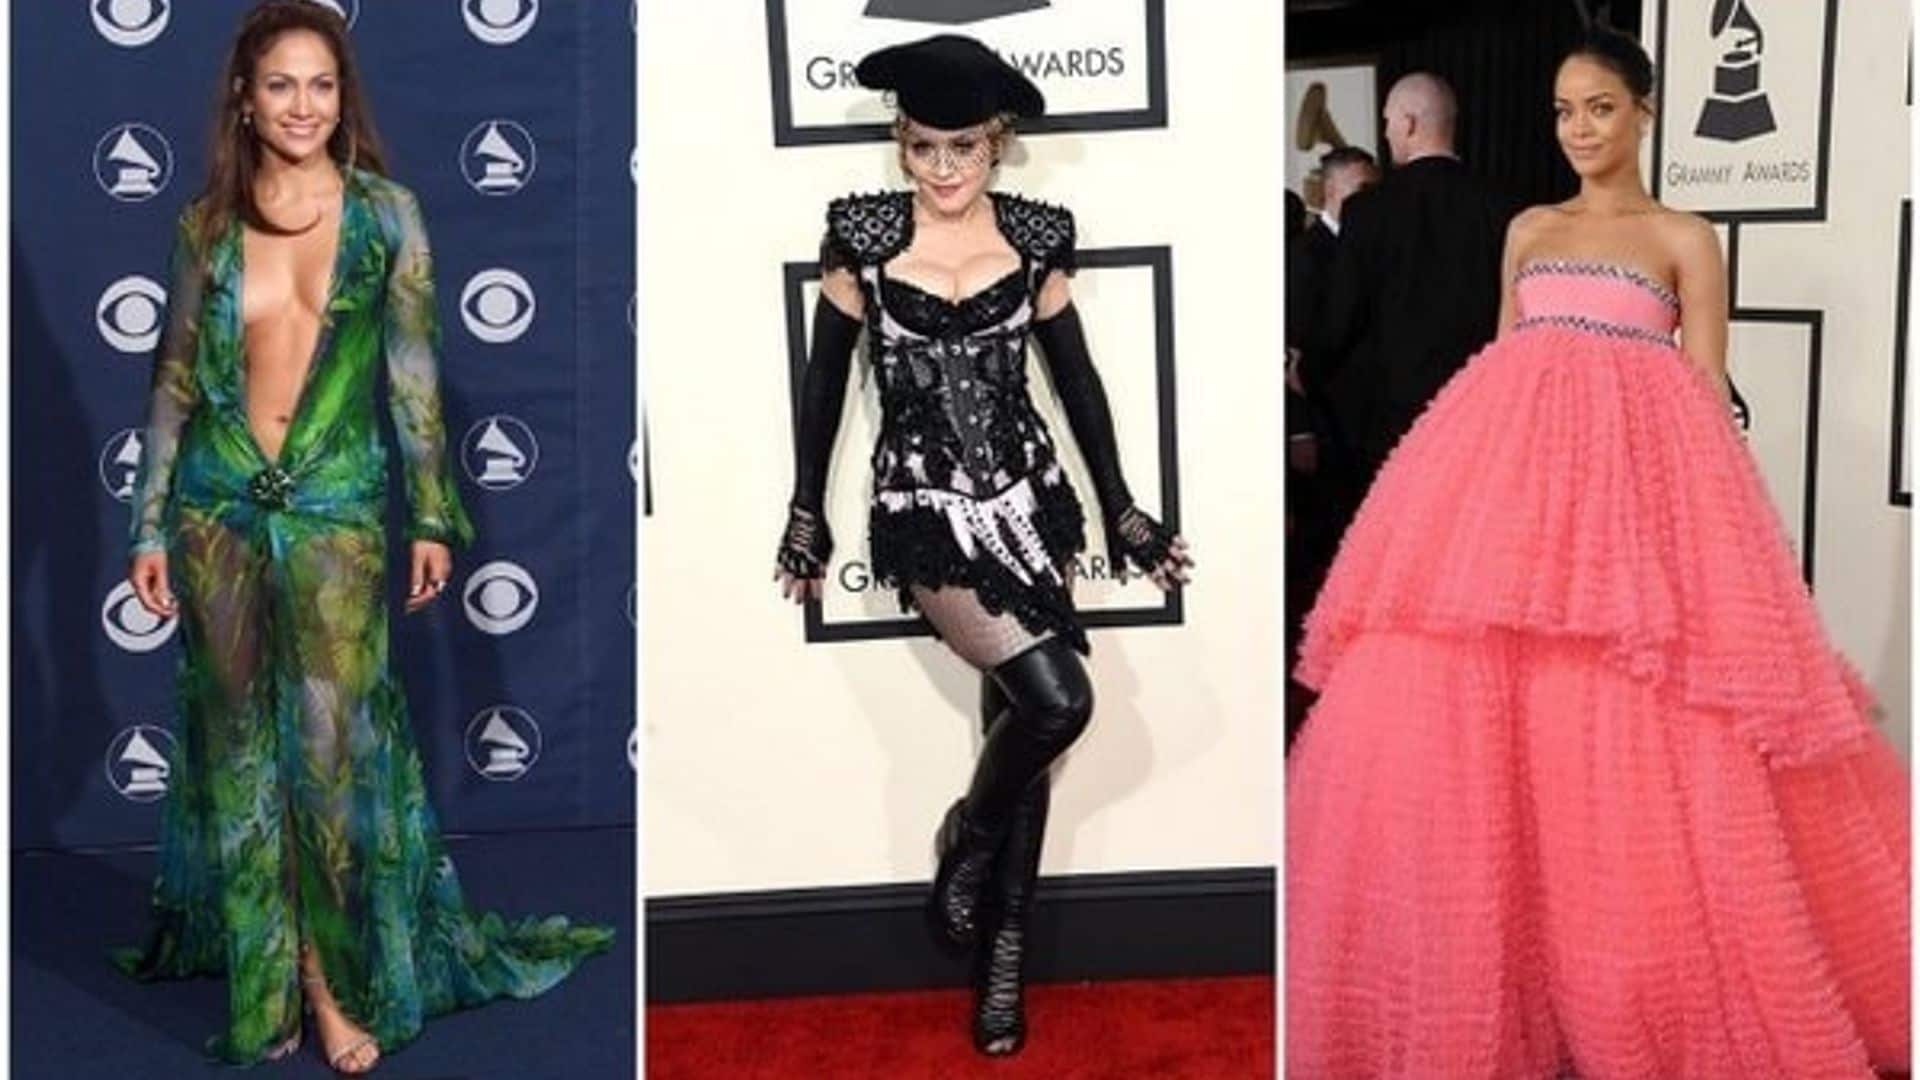 The coolest, craziest and most memorable Grammy Awards outfits